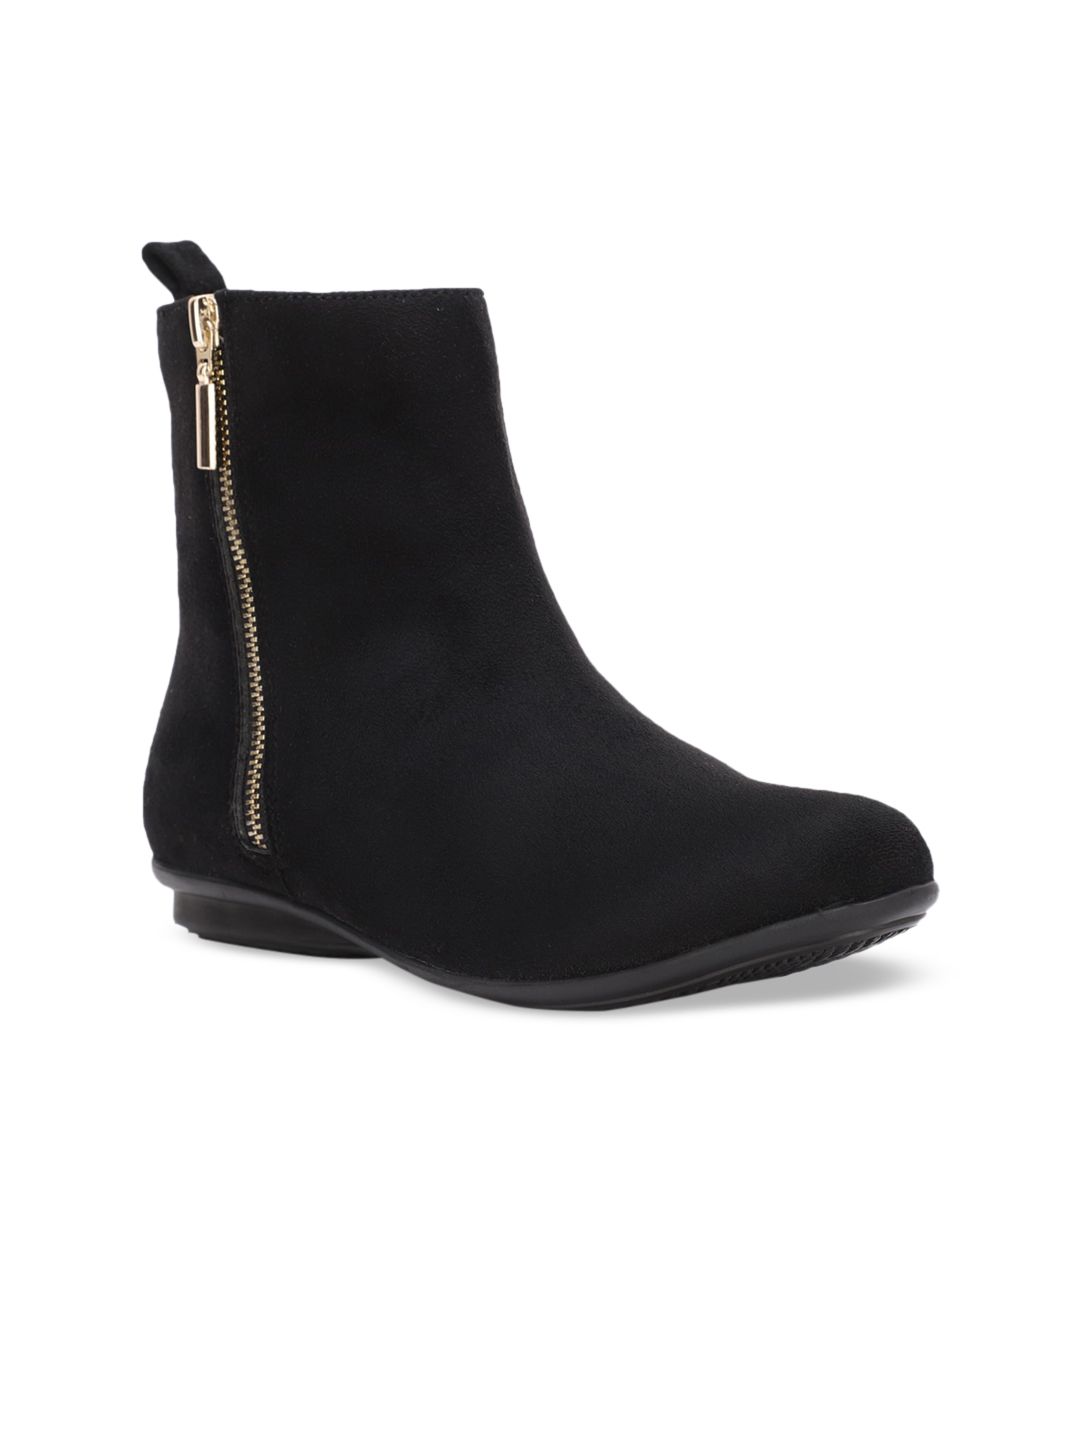 Bruno Manetti Women Black Solid Suede High-Top Flat Boots Price in India